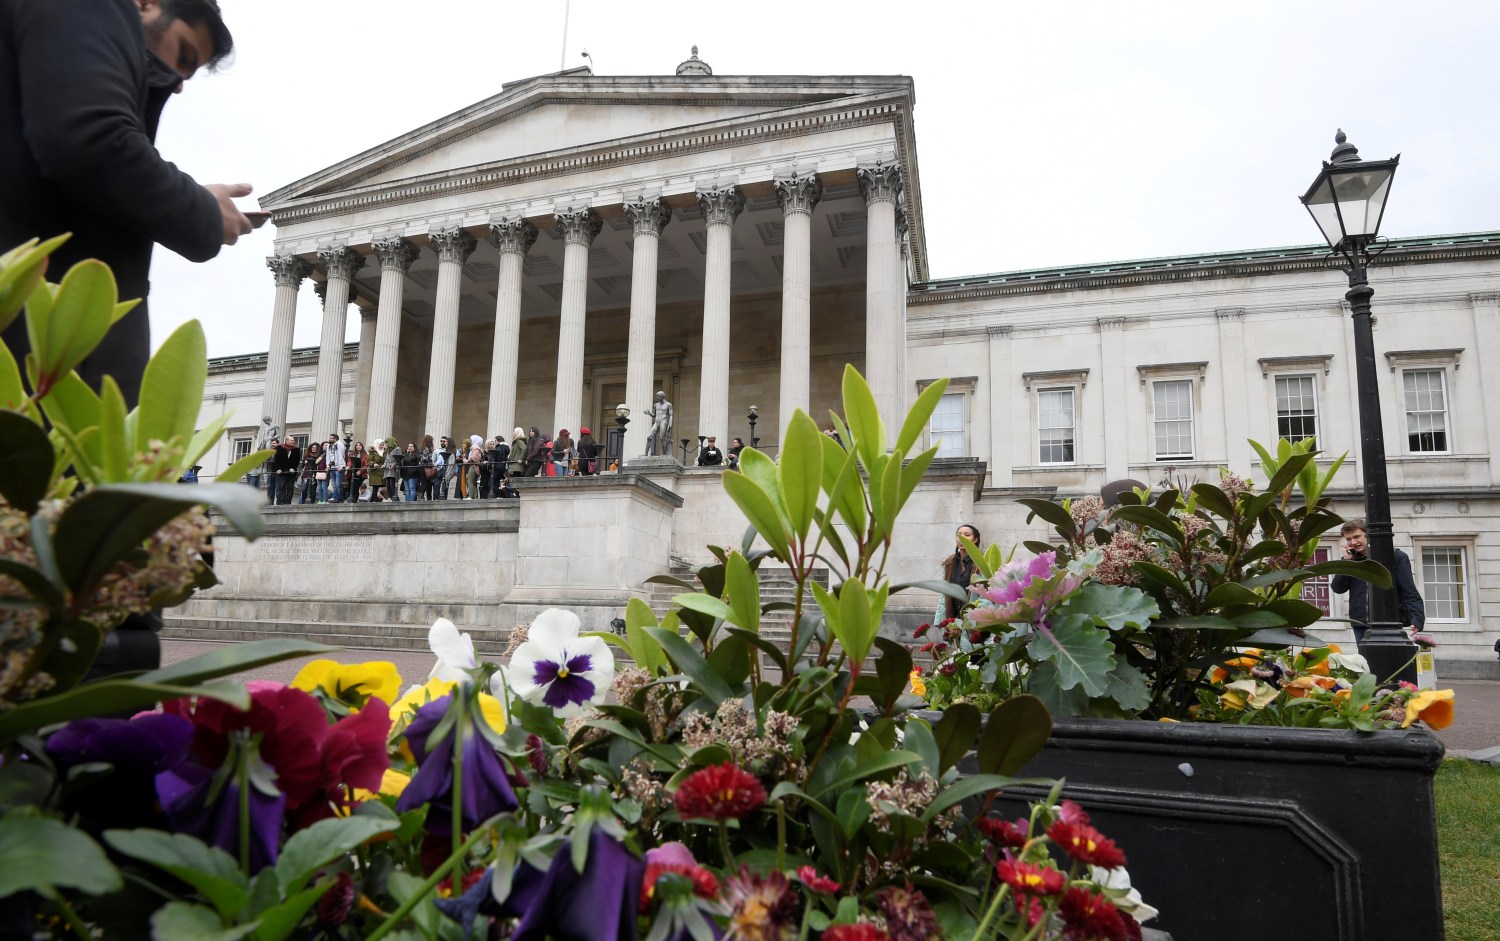 Students and visitors are seen walking around the main campus buildings of University College London (UCL) in London, Britain